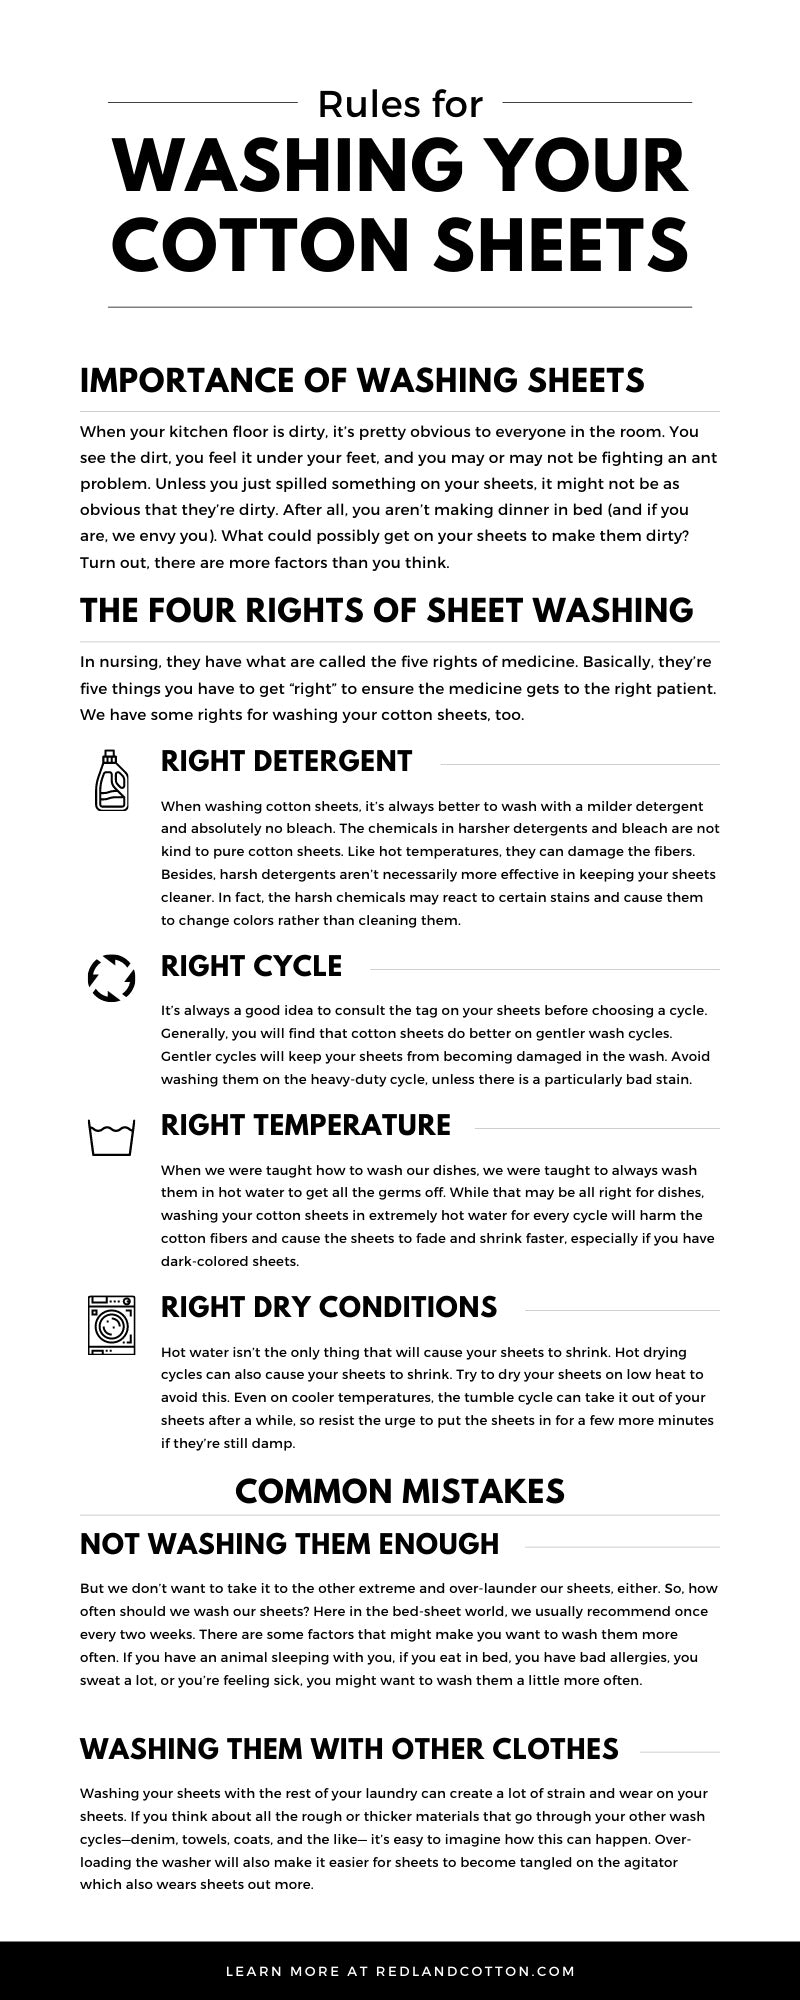 Rules for Washing Your Cotton Sheets